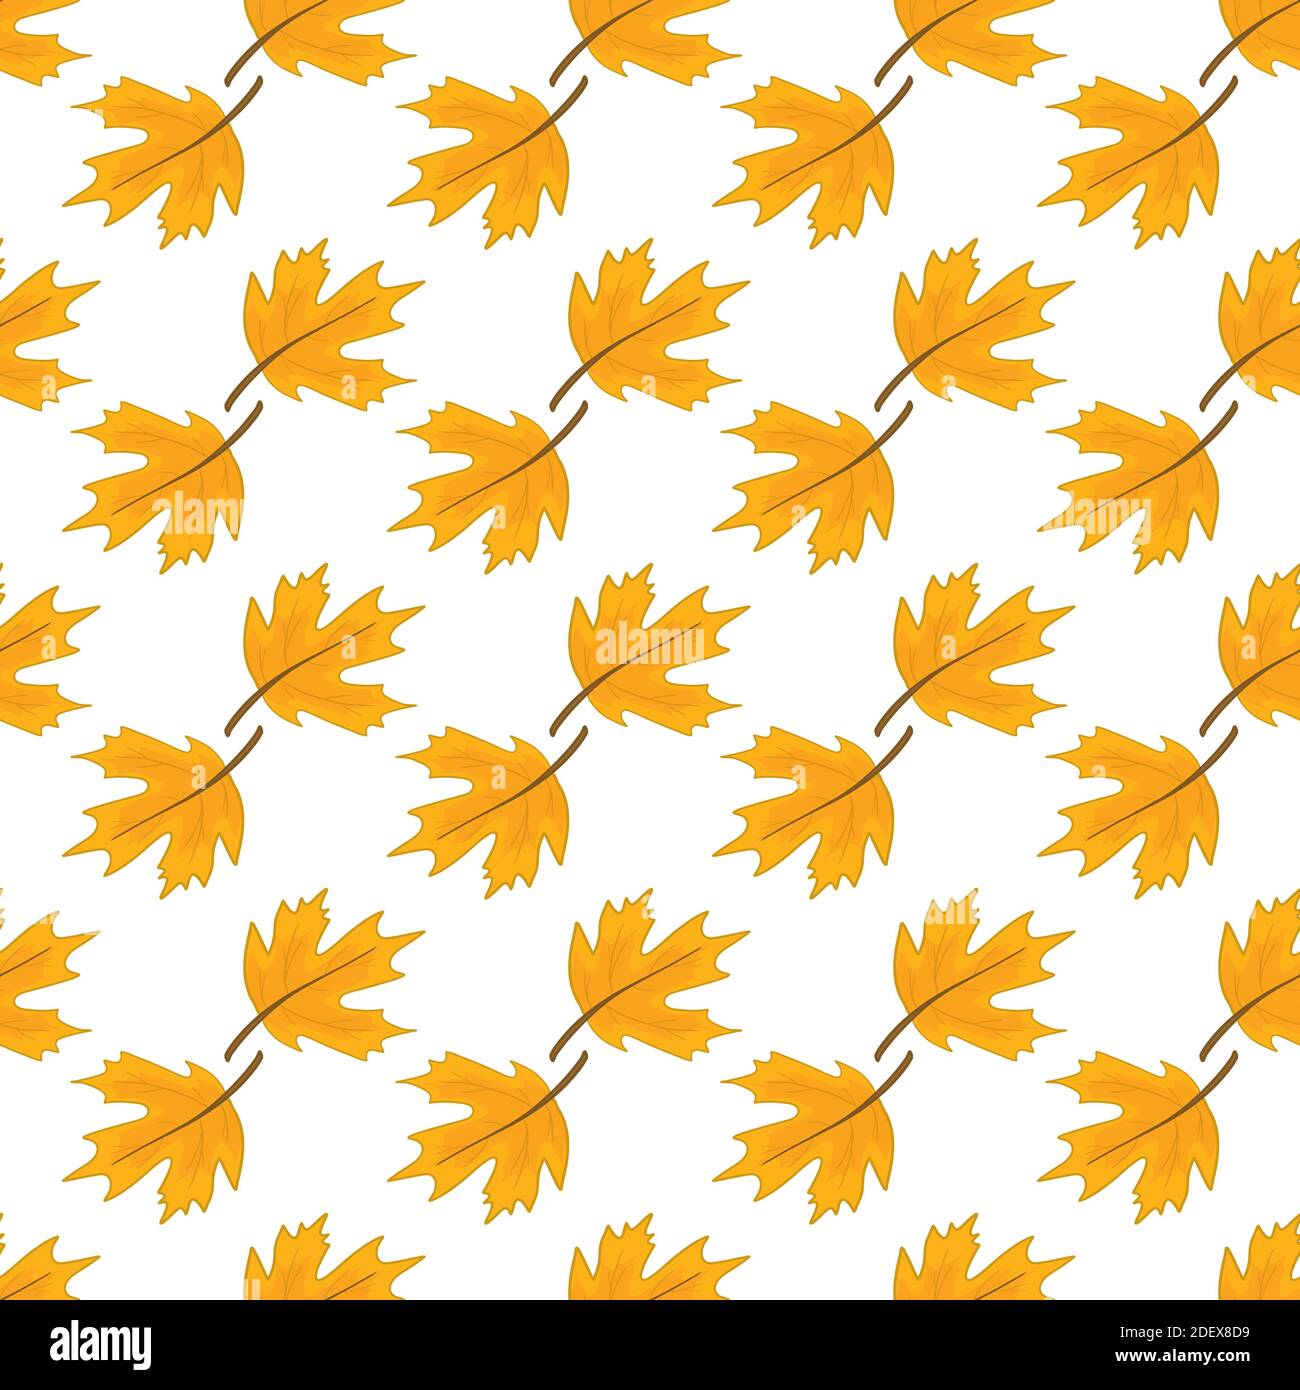 autumn pattern with fallen oak leaves and acorns on a white background Stock Vector